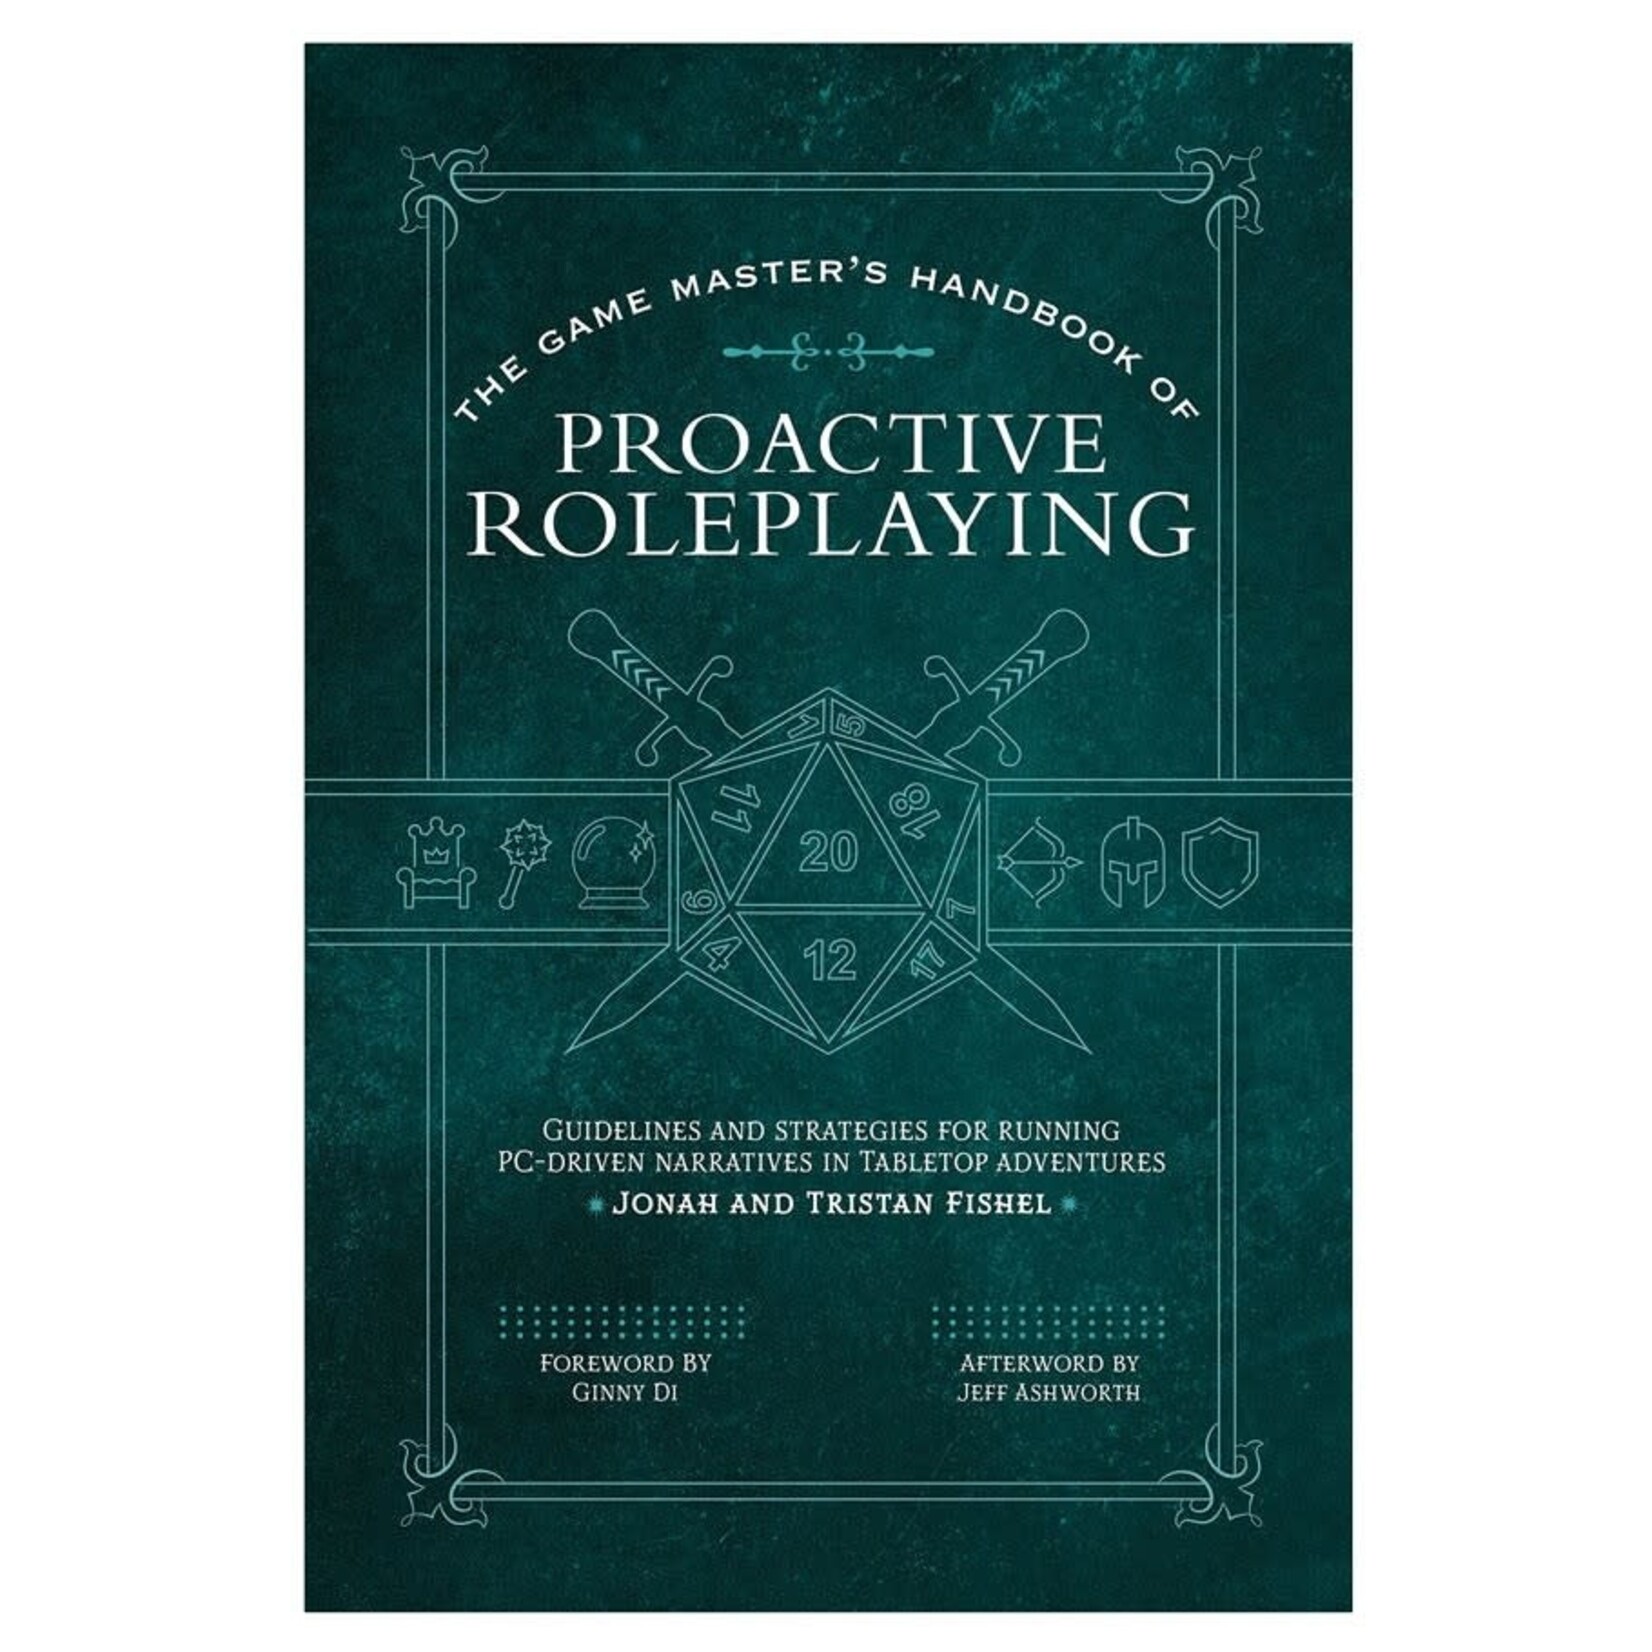 Media Lab Game Master's Handbook of Proactive Roleplaying 5E